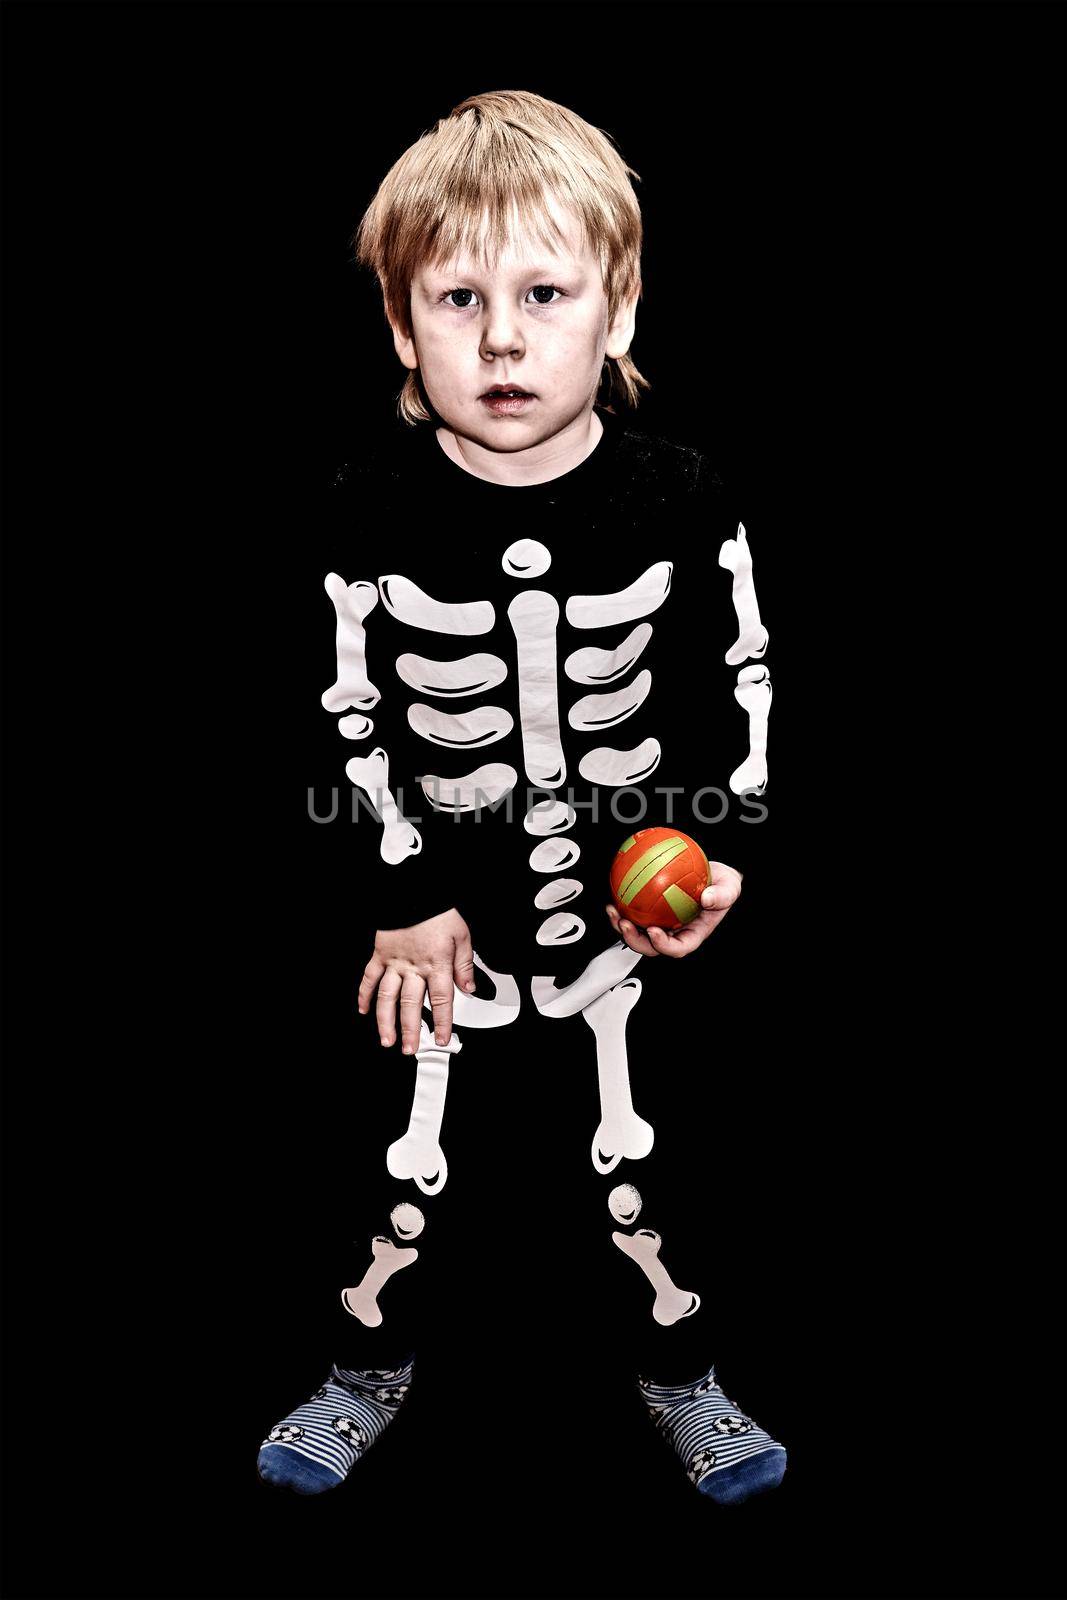 child of four years old in a skeleton costume with an orange ball in his hand on black background. Children fears and scares